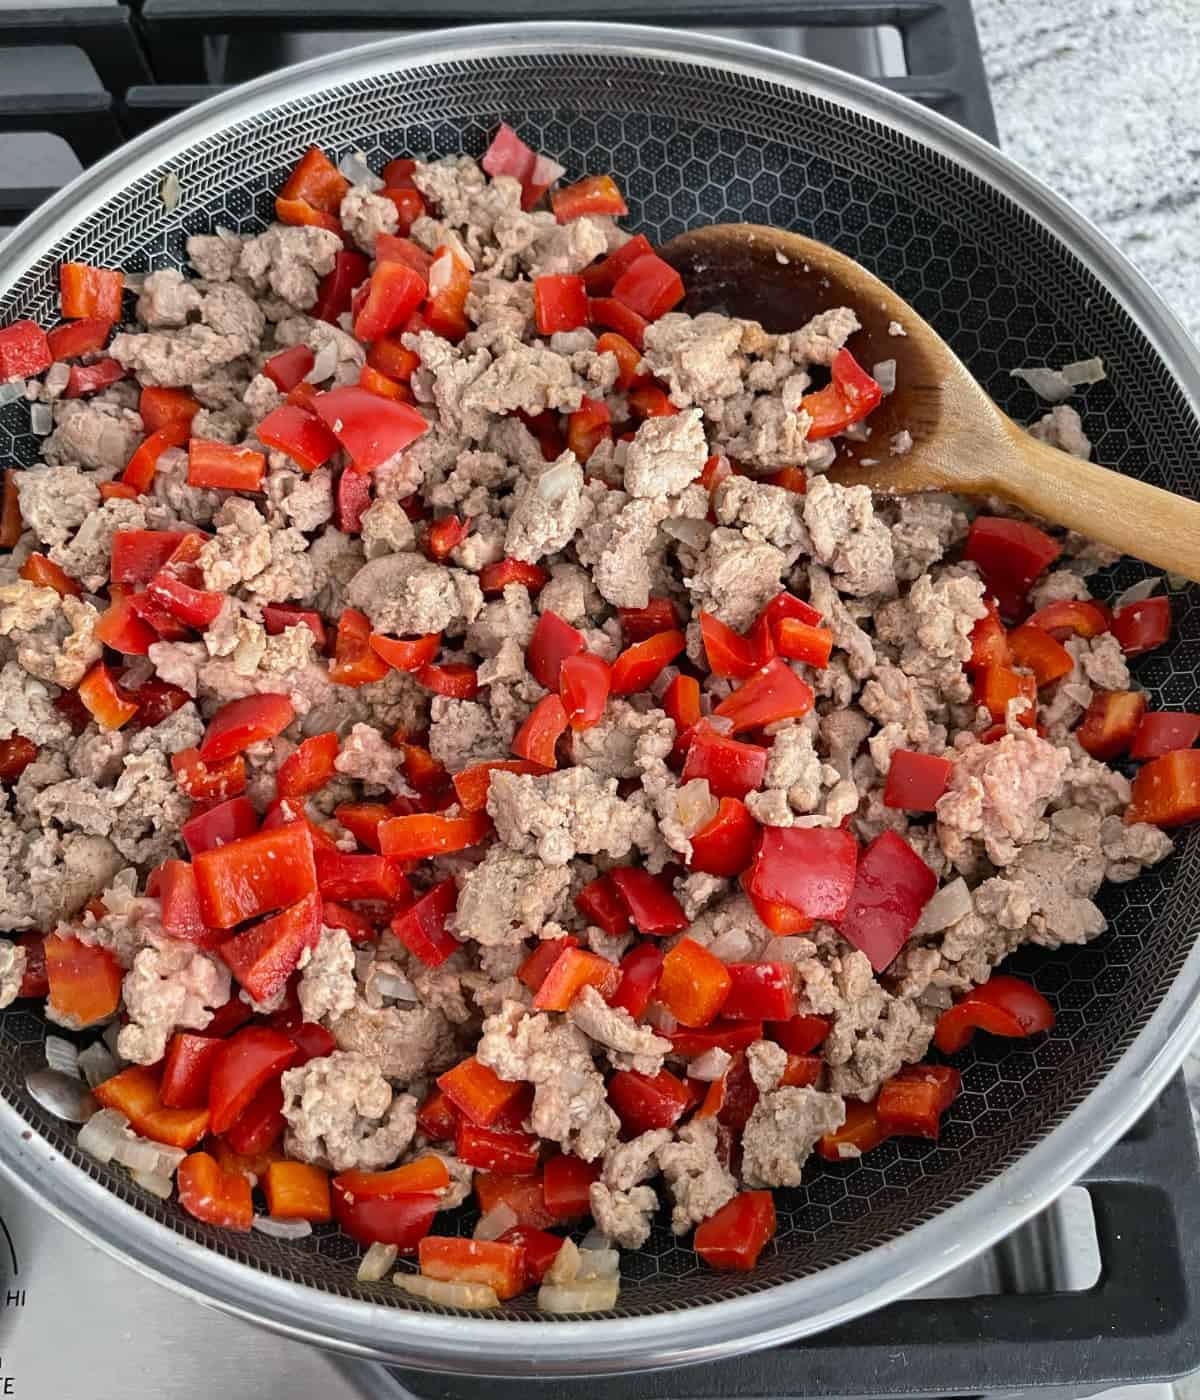 Cooking ground turkey, chopped red bell pepper and onion in skillet while stirring with a wooden spoon.